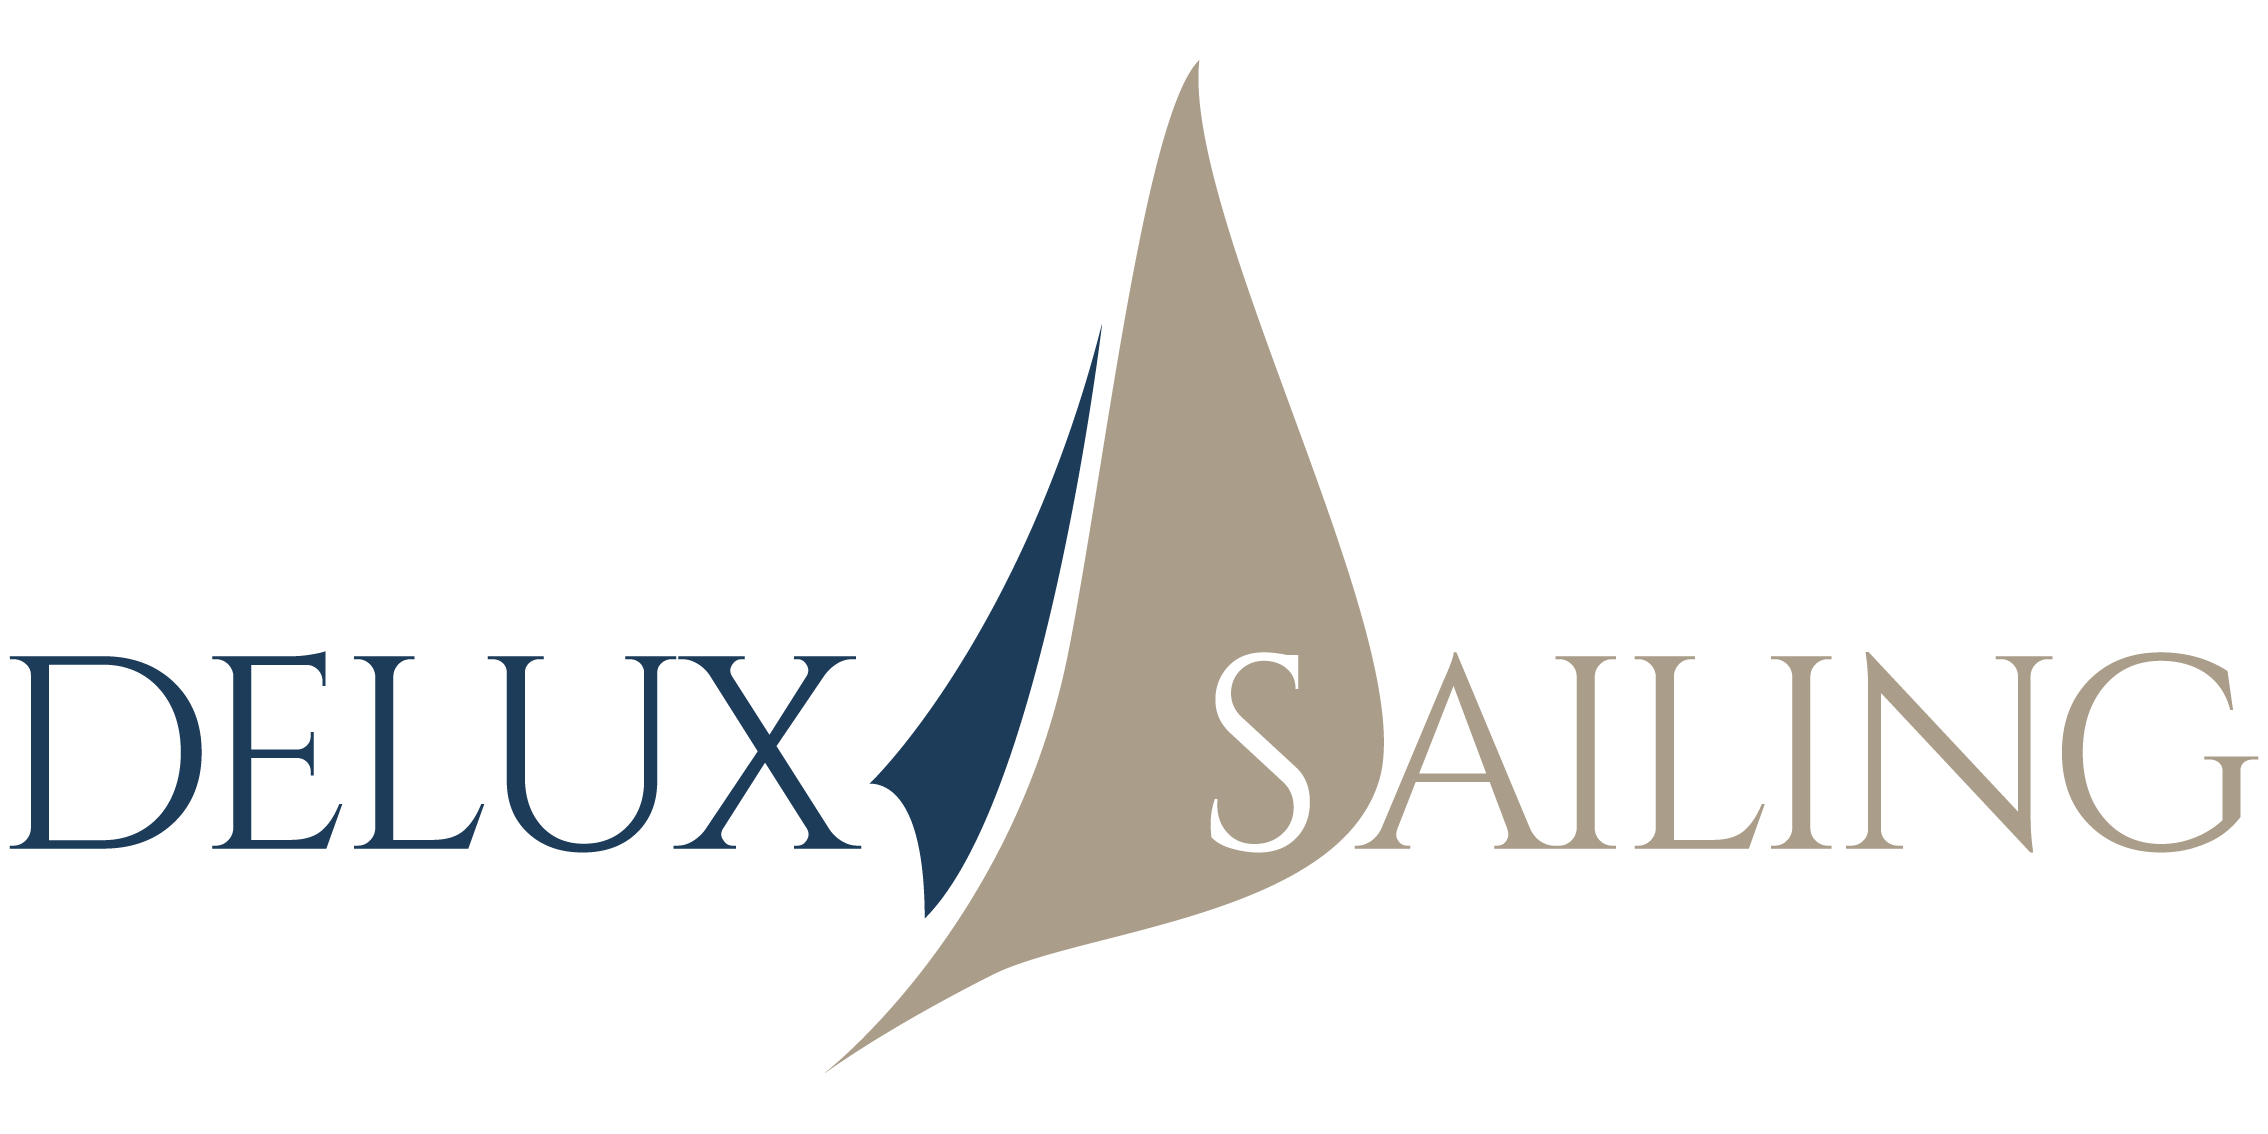 DeluxSailing